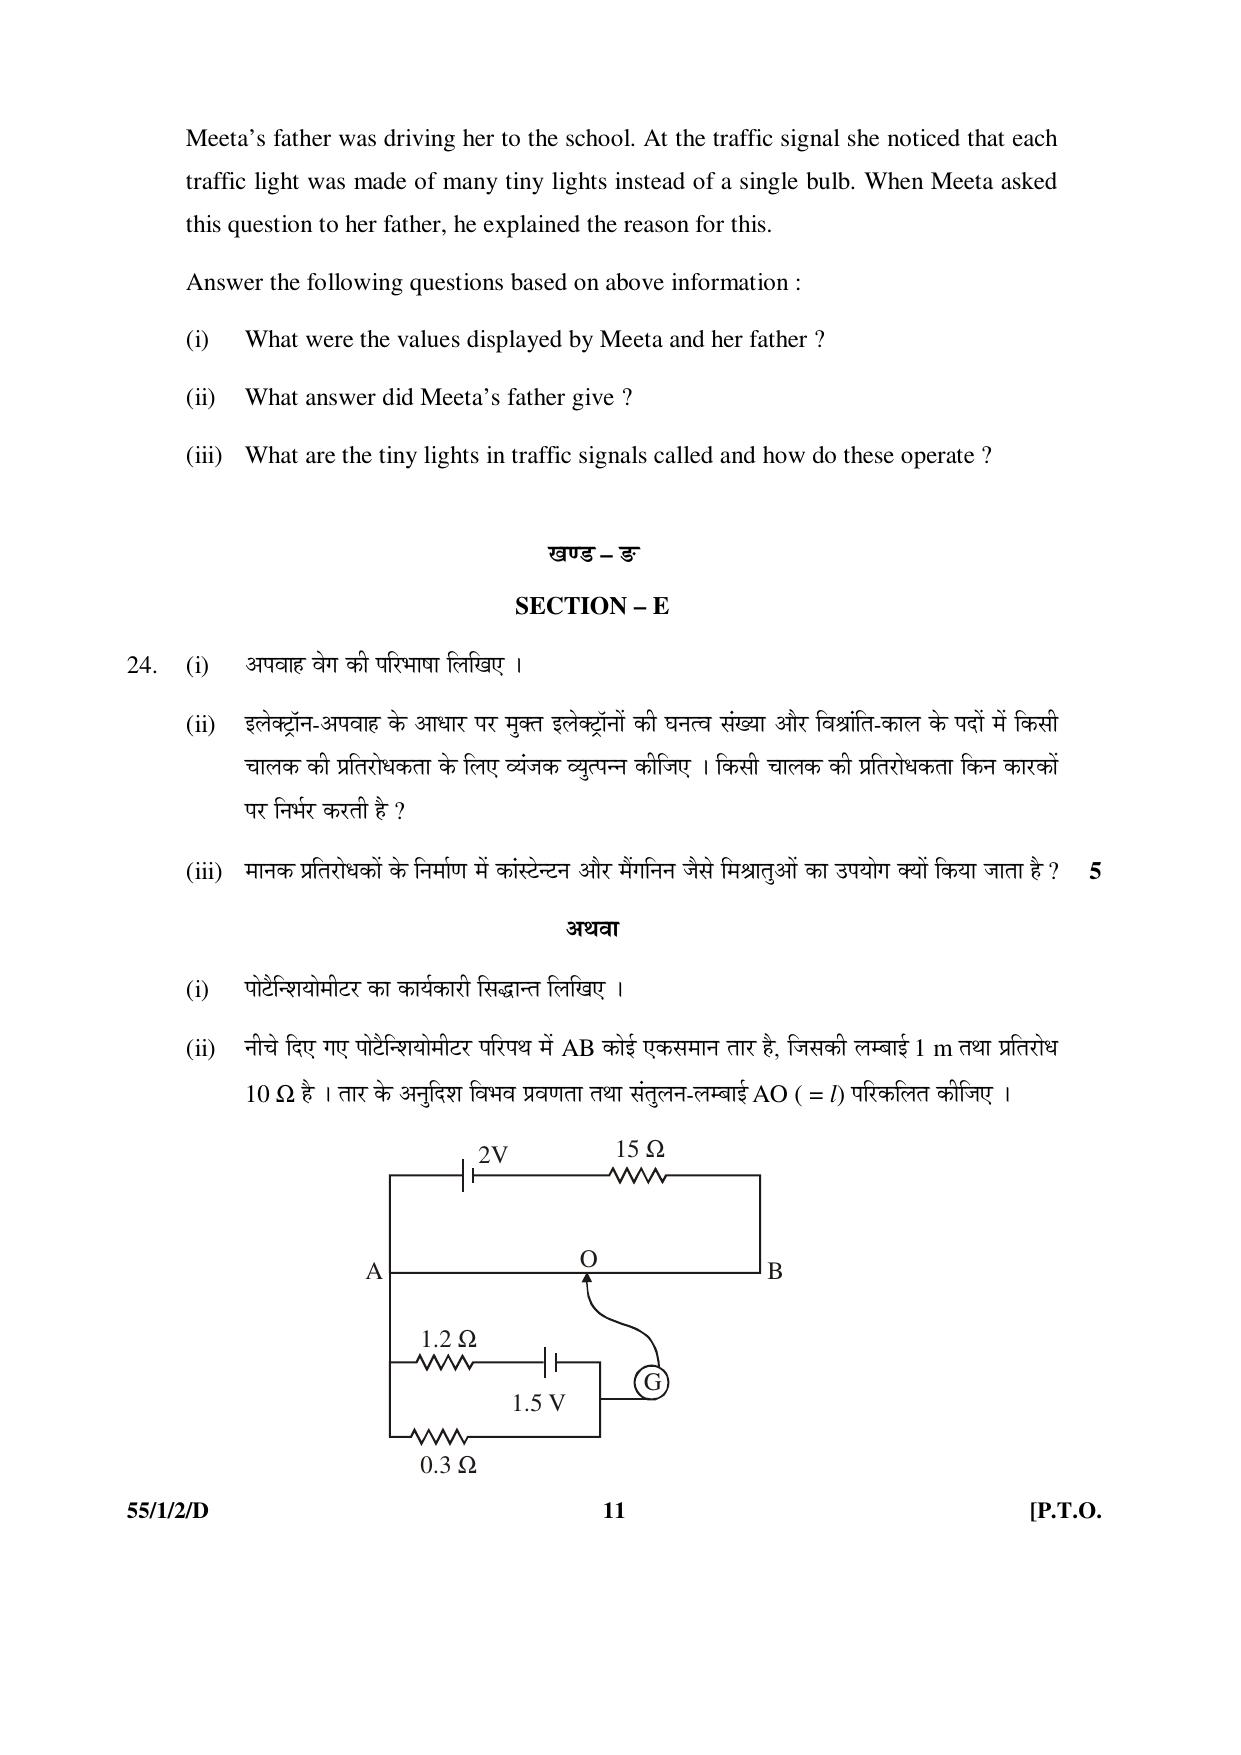 CBSE Class 12 55-1-2-D PHYSICS 2016 Question Paper - Page 11